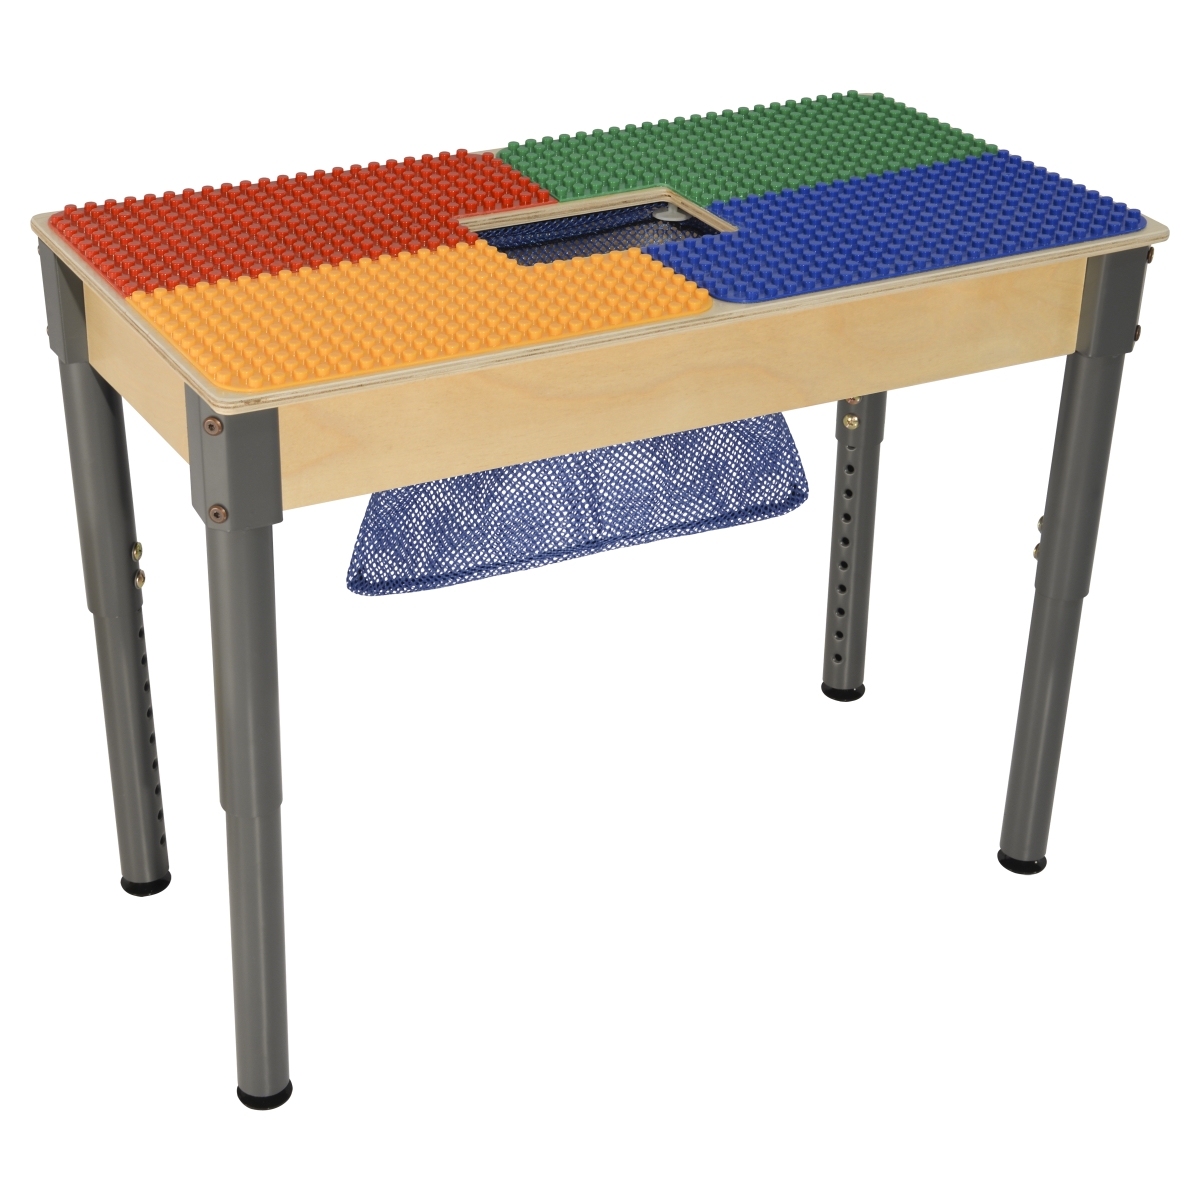 Tp1631pgna1217 12 X 17 In. Duplo Compatible Rectangle Table With Adjustable Legs, Multi Color